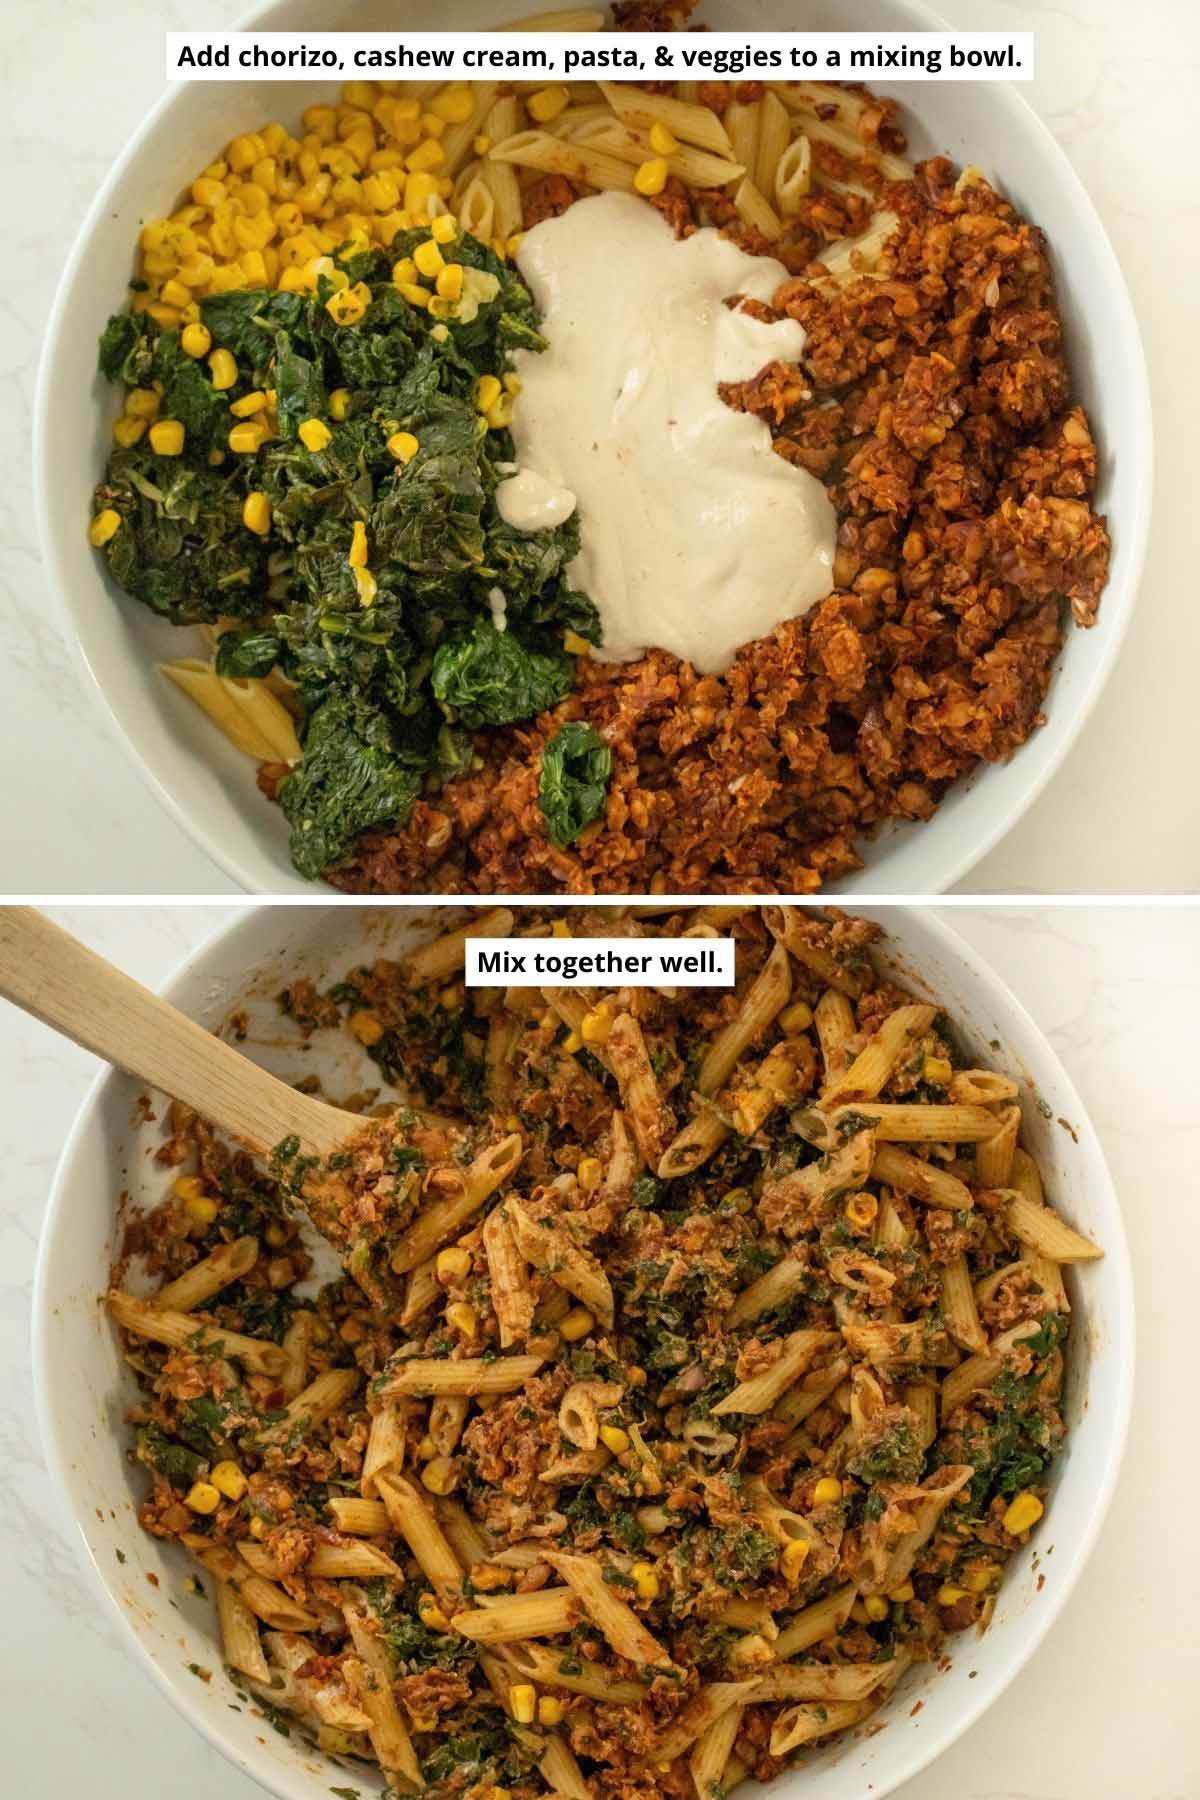 image collage showing the vegan chorizo pasta ingredients in the mixing bowl before and after mixing together